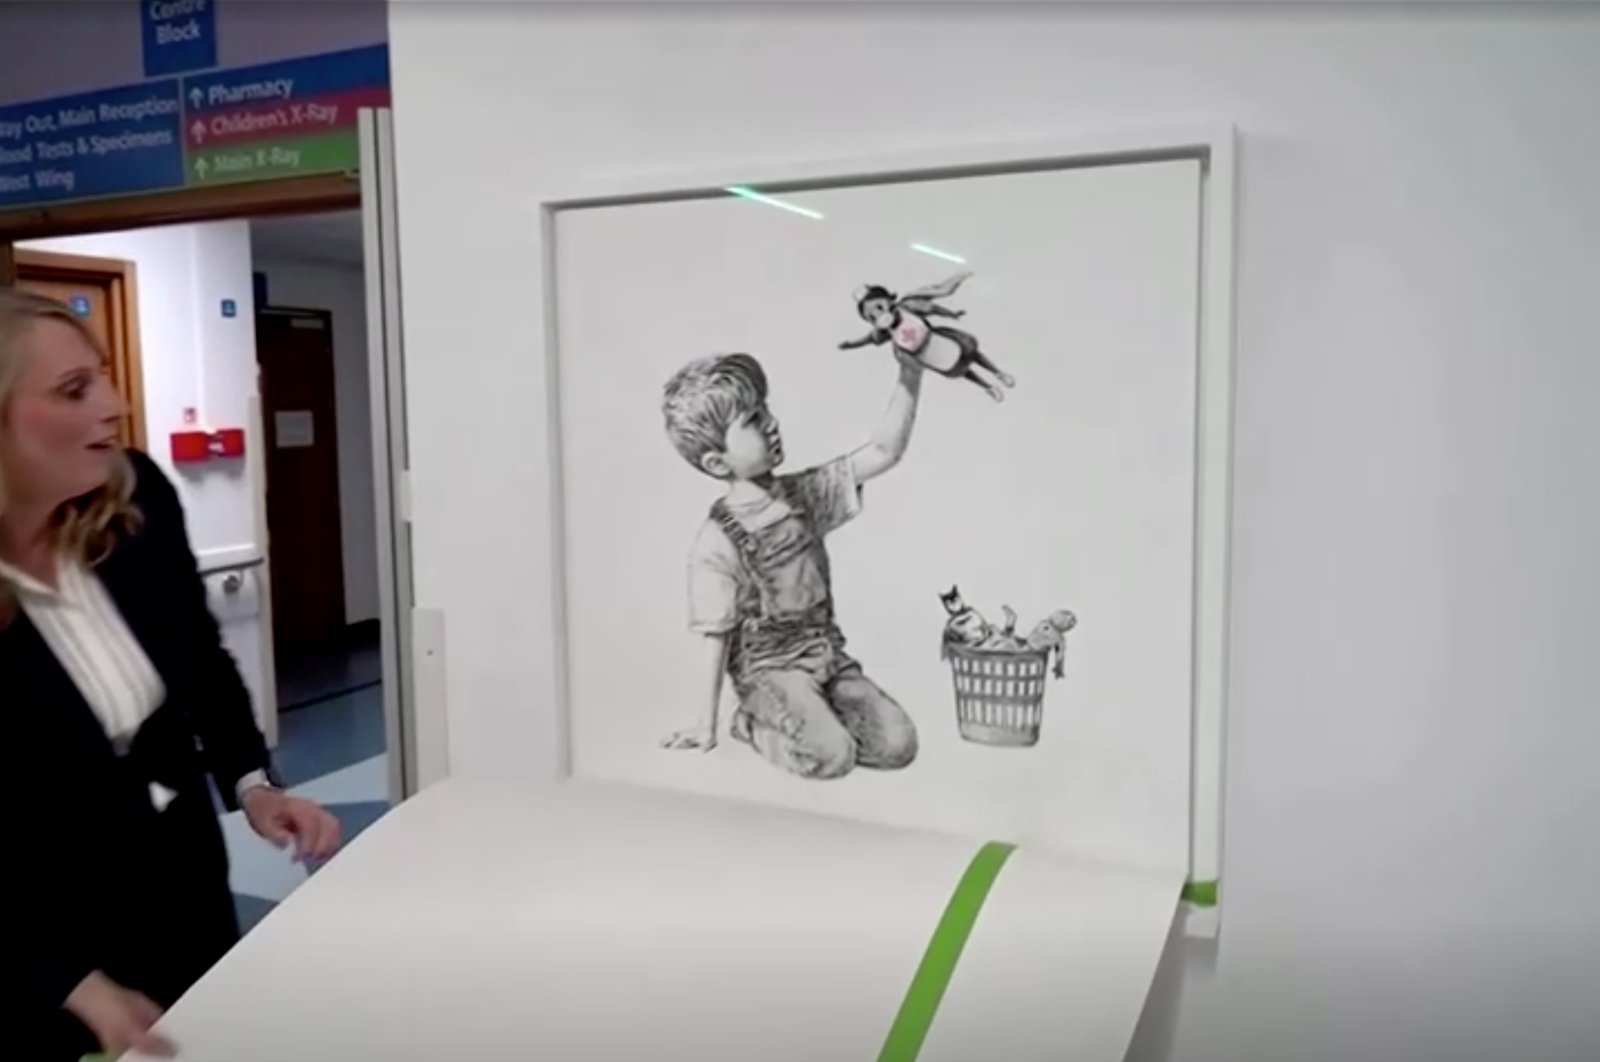 Chief executive of University Hospital Southampton NHS Foundation Trust, Paula Head, unveils Banksy's Game Changer artwork, in London, Britain March 16, 2021, in this still image taken from a video. (BBC/@banksy instagram/via Reuters)